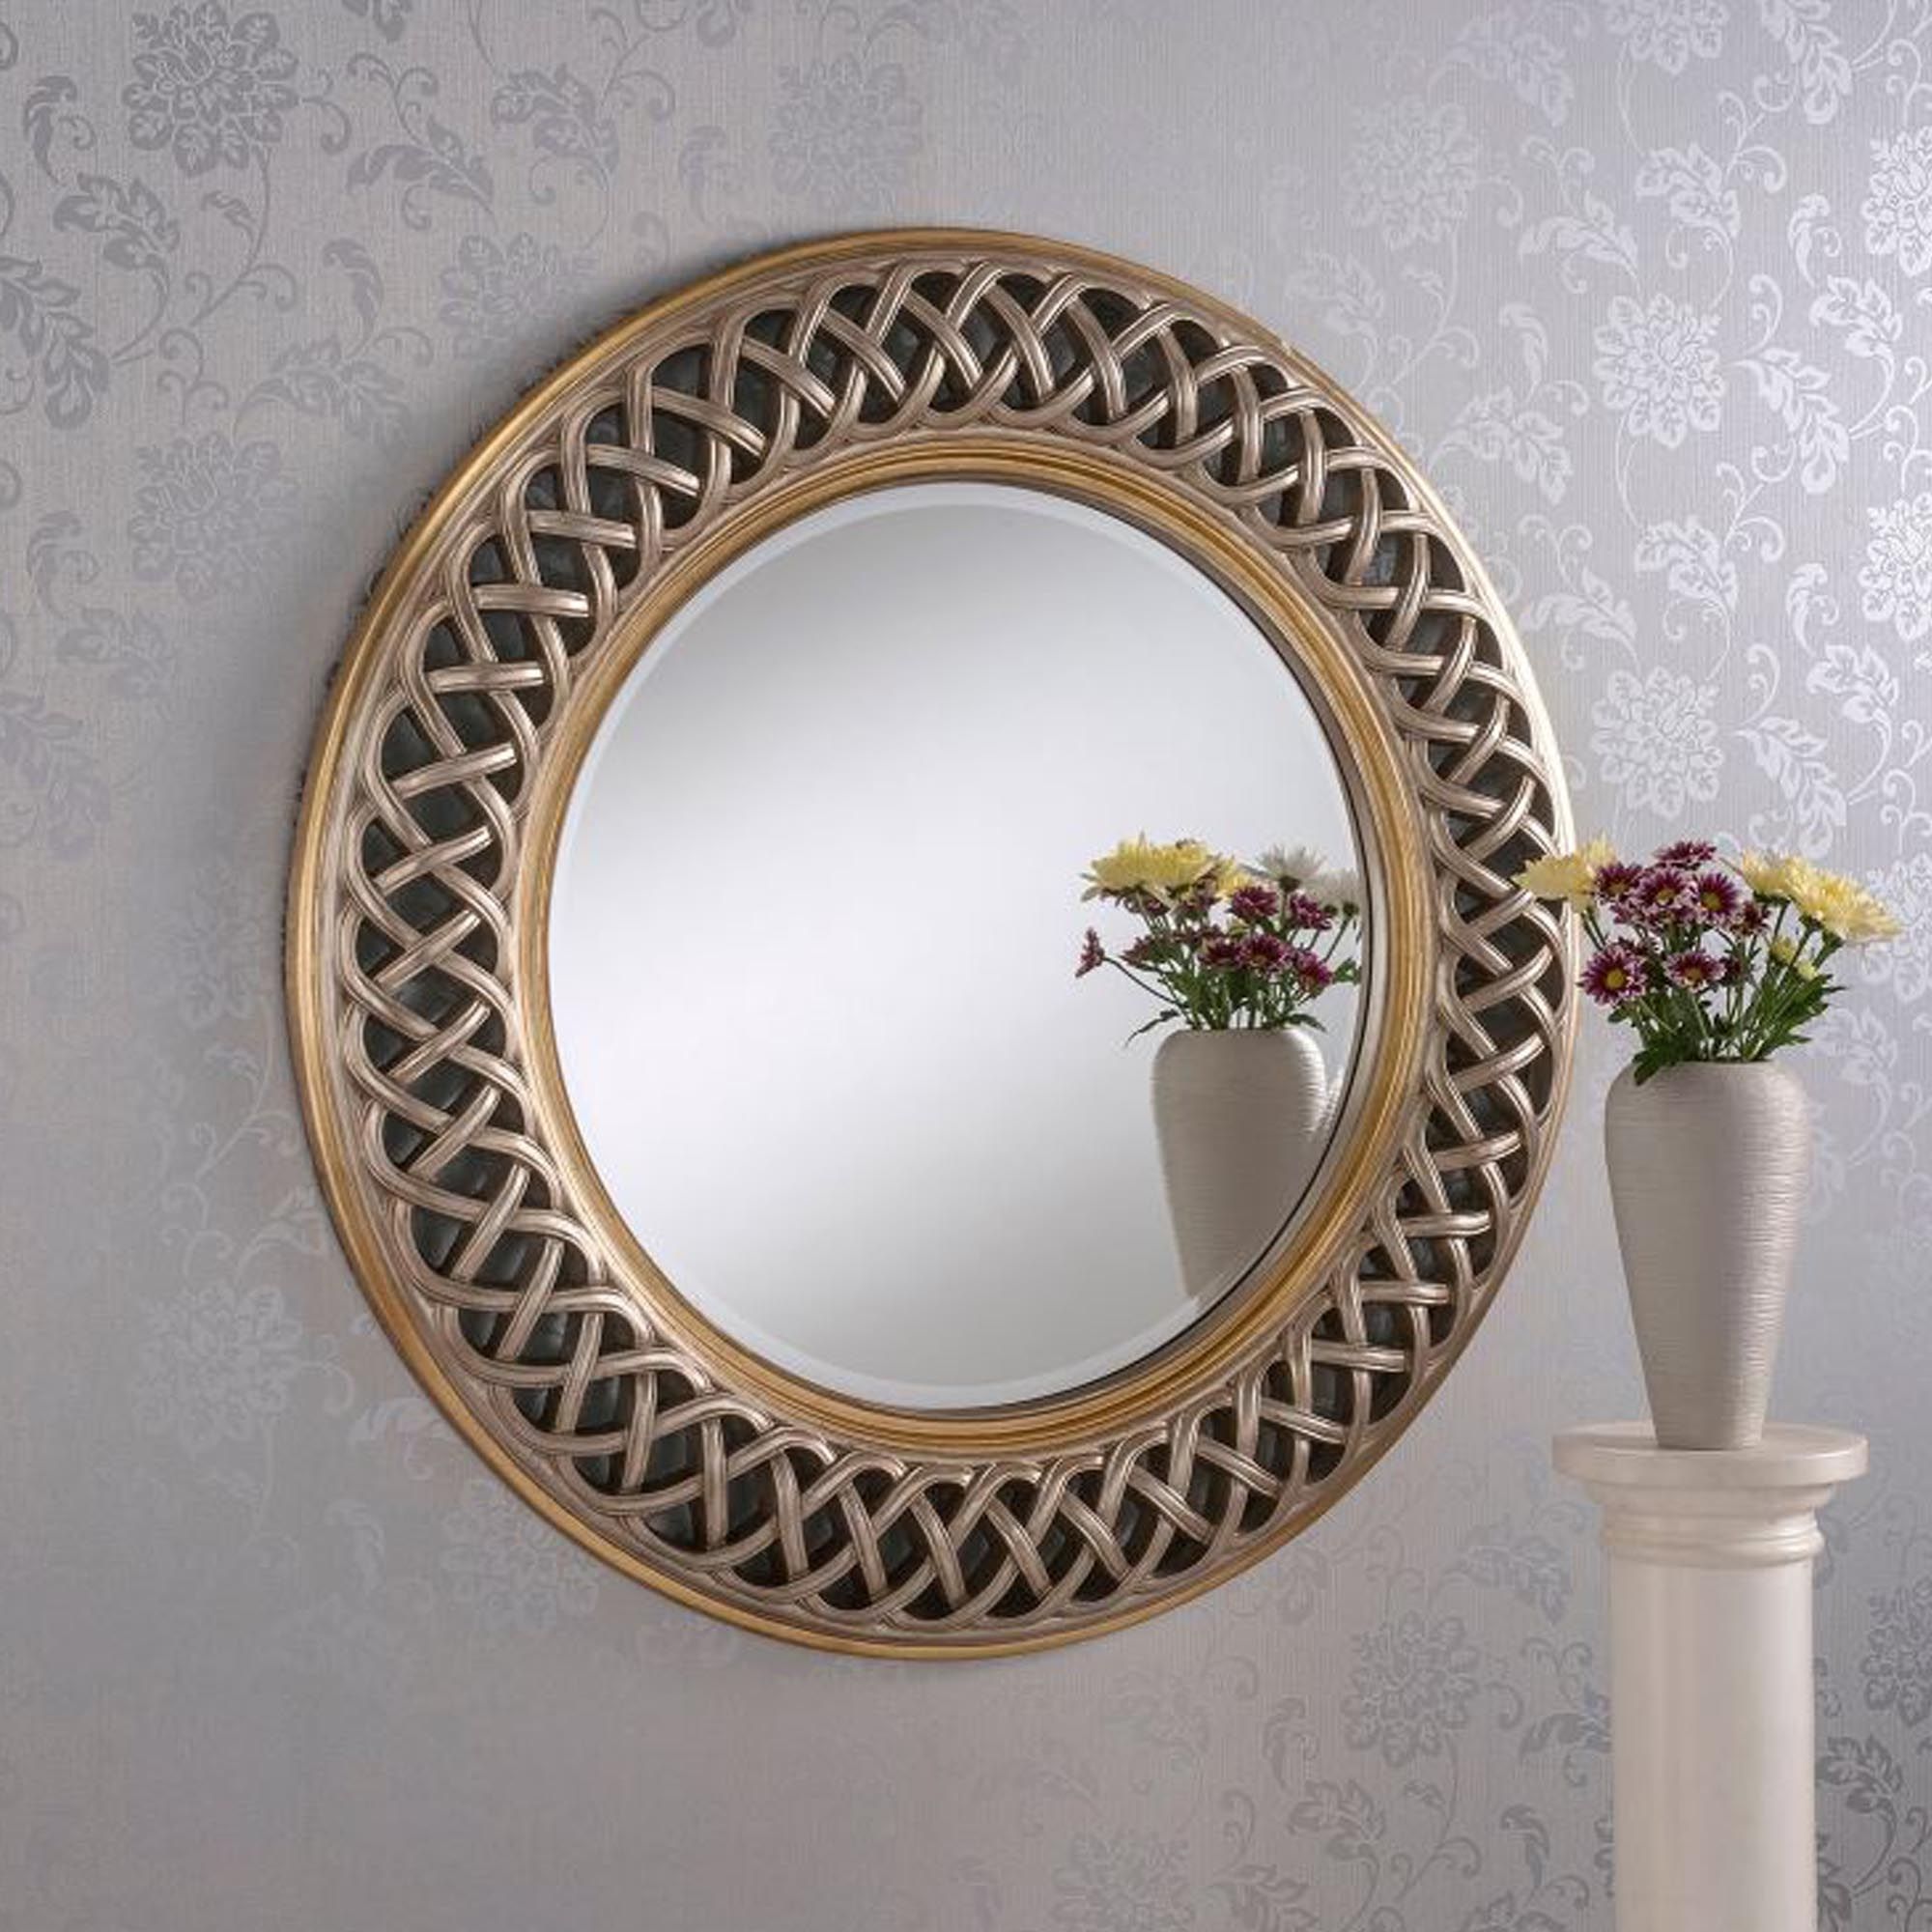 Interlocking Lace Silver/gold Decorative Wall Mirror (View 15 of 15)